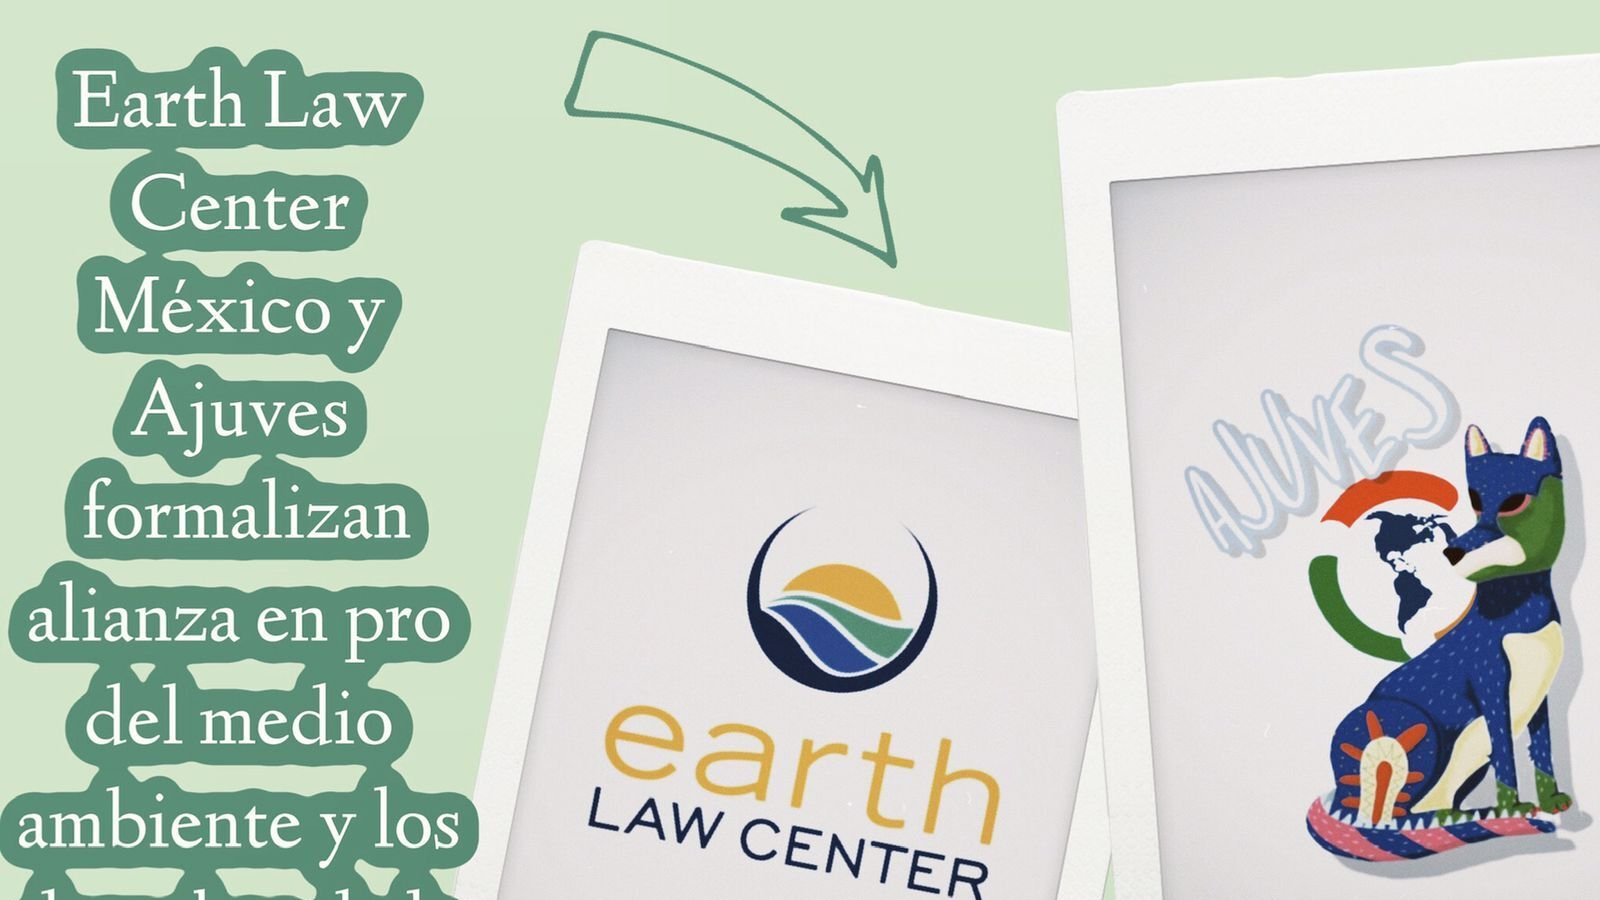 Earth Law Center on Twitter: "Earth Law Center Mexico and @ajuves_mx formalize their alliance in favor of the environment and Rights of https://t.co/dcY6TSaPjM" / Twitter